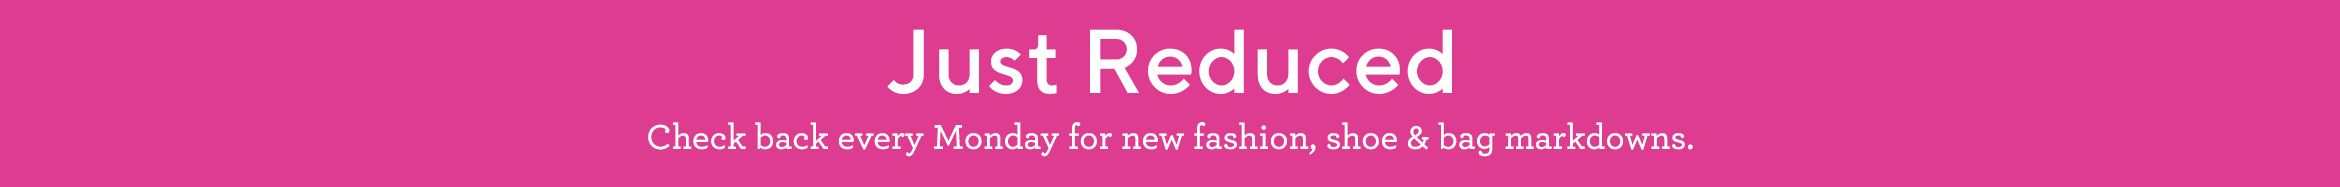 Just Reduced  Check back every Monday for new fashion, shoe & bag markdowns.